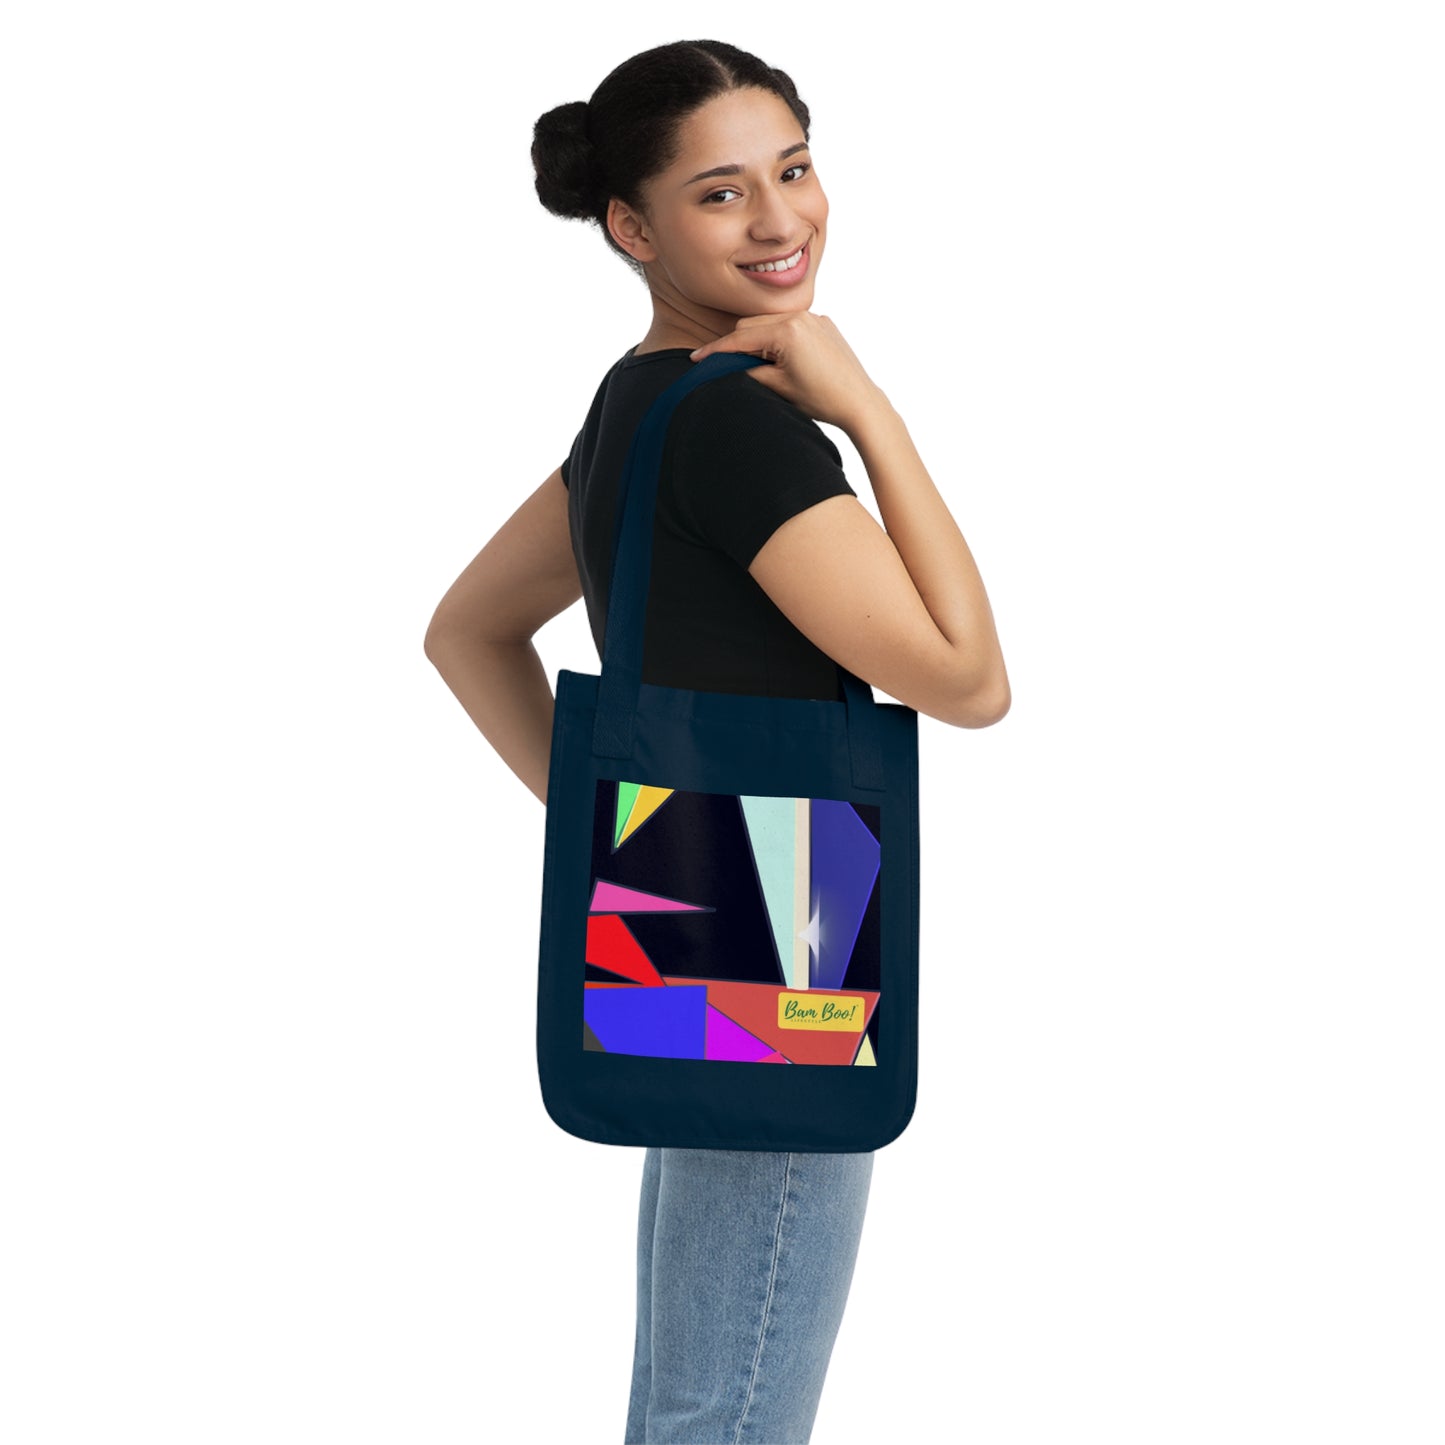 "Intertwined Nature and Technology: A Geometric Masterpiece" - Bam Boo! Lifestyle Eco-friendly Tote Bag